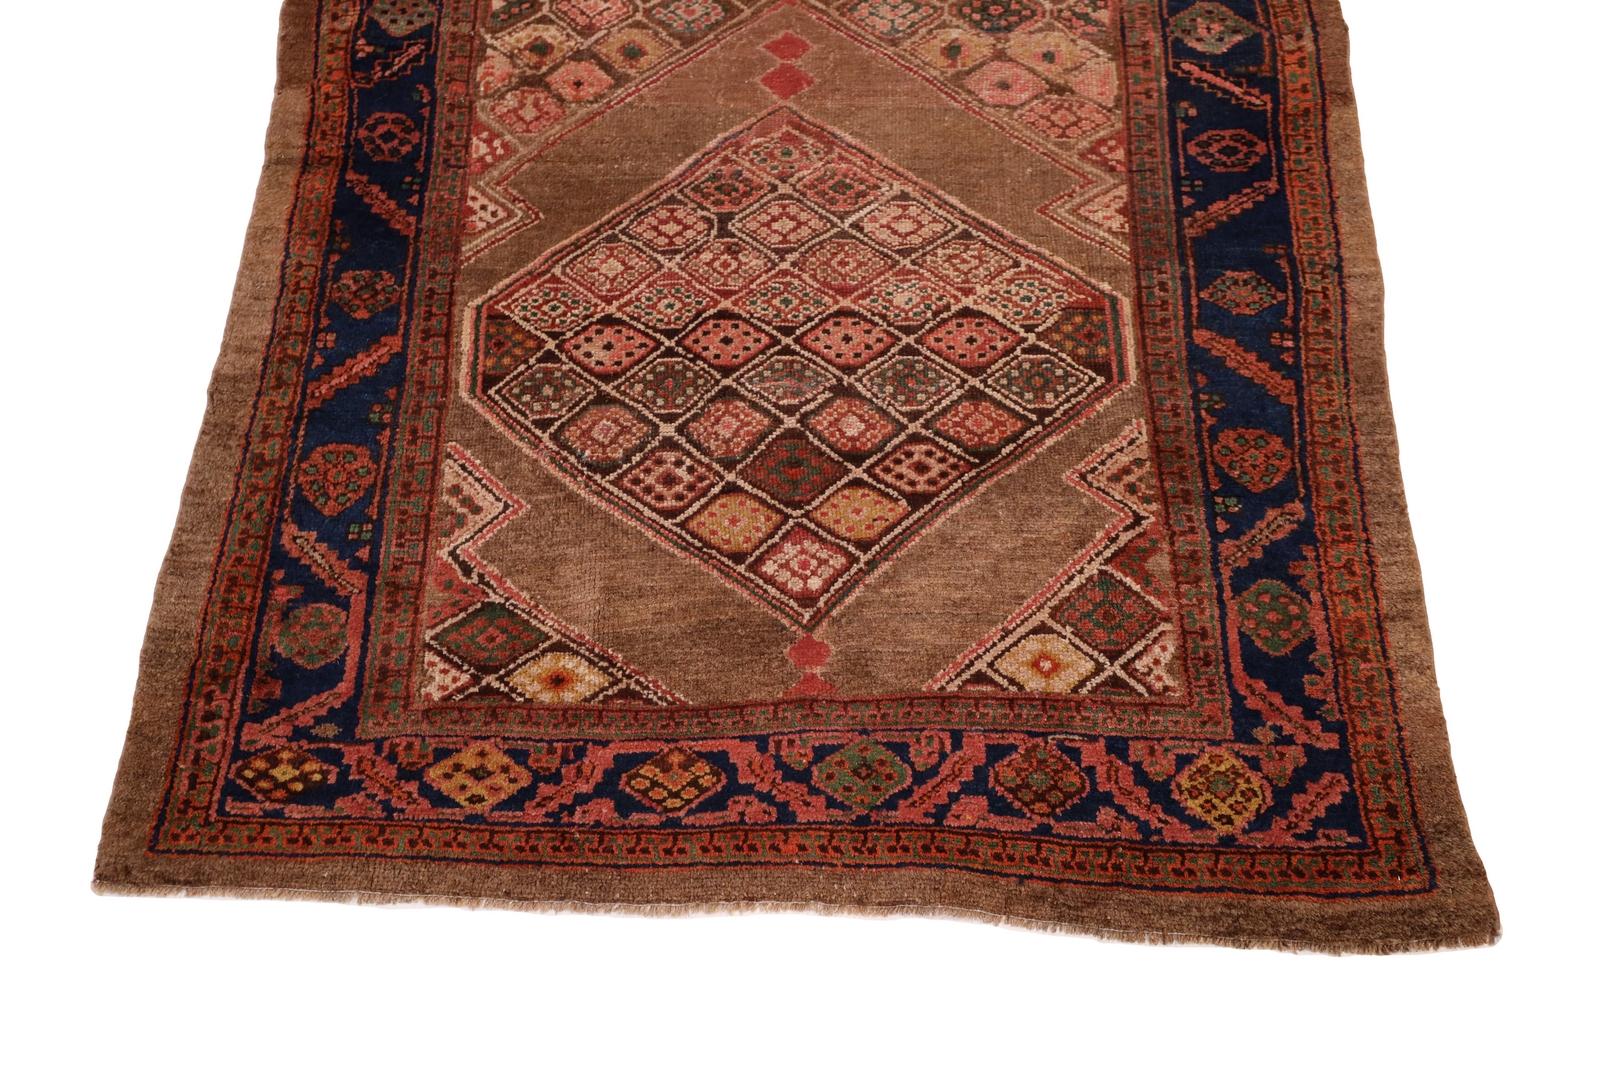 The Kurdish Bidjar rug exudes a timeless and unparalleled elegance, boasting a rich and inviting brown background that forms the perfect canvas for an intricate and distinctive medallion design. This exceptional piece of craftsmanship is a true